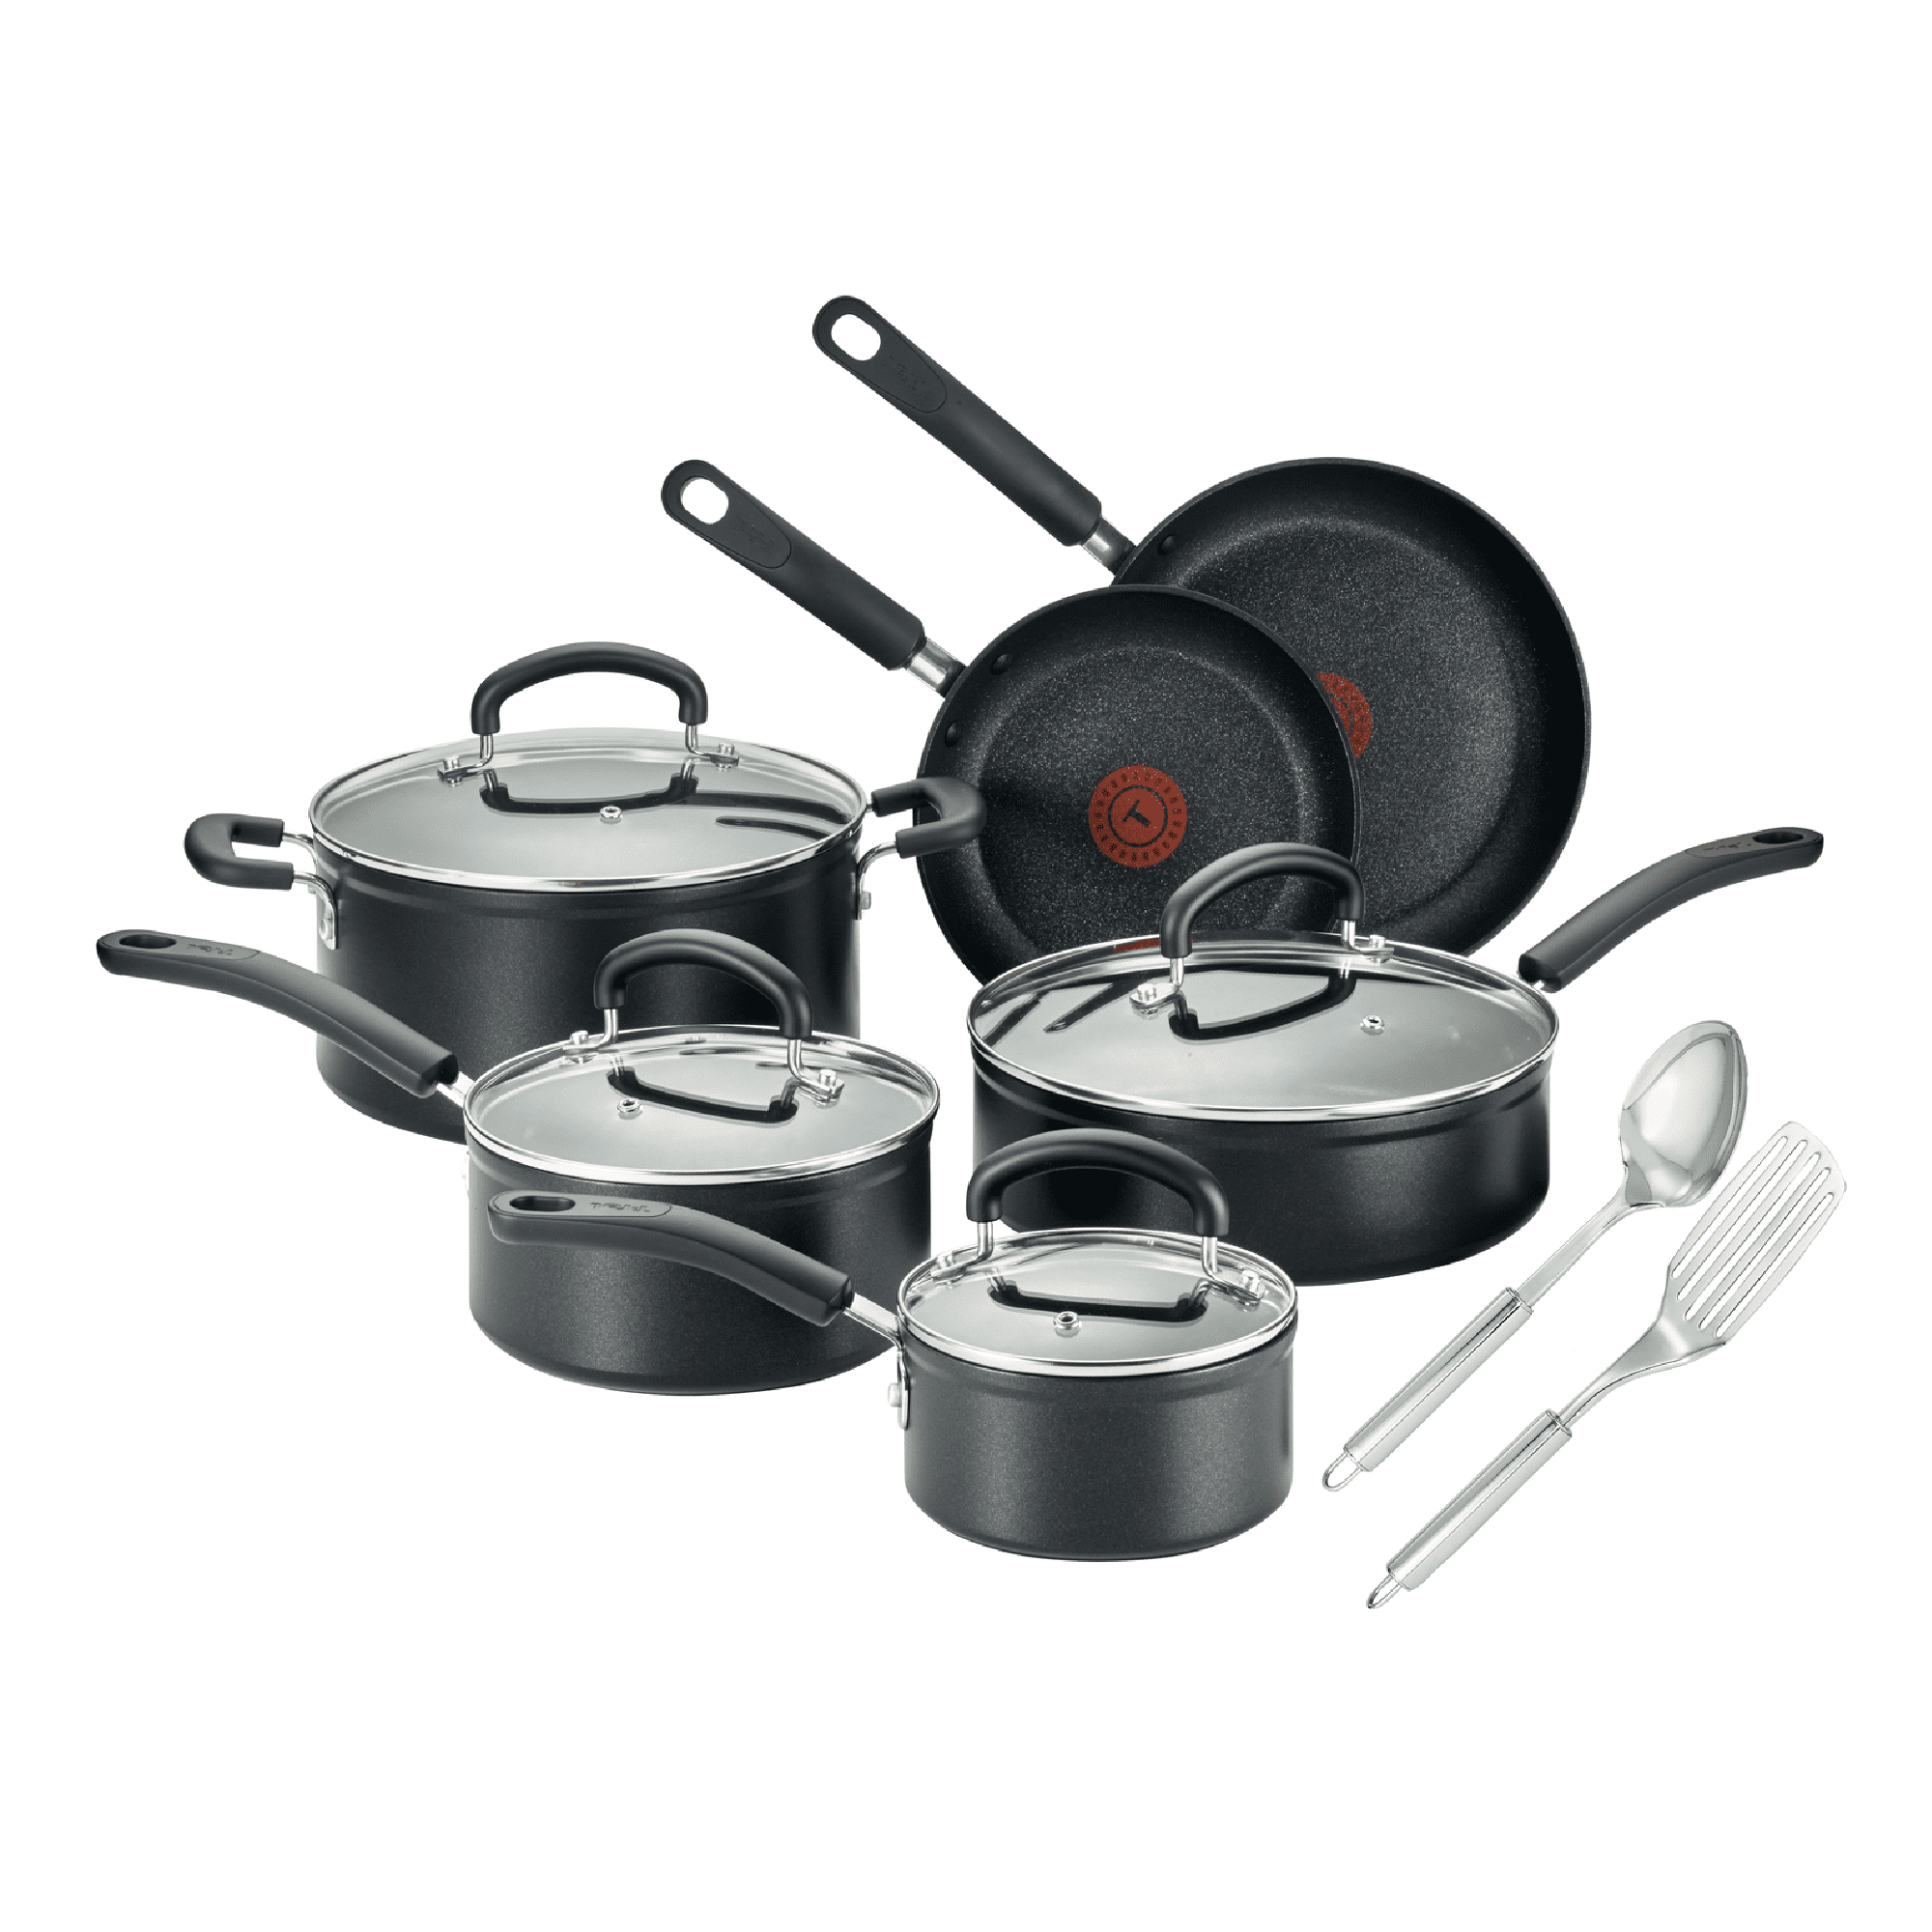 T-Fal cookware set: Save big on our favorite nonstick cookware set